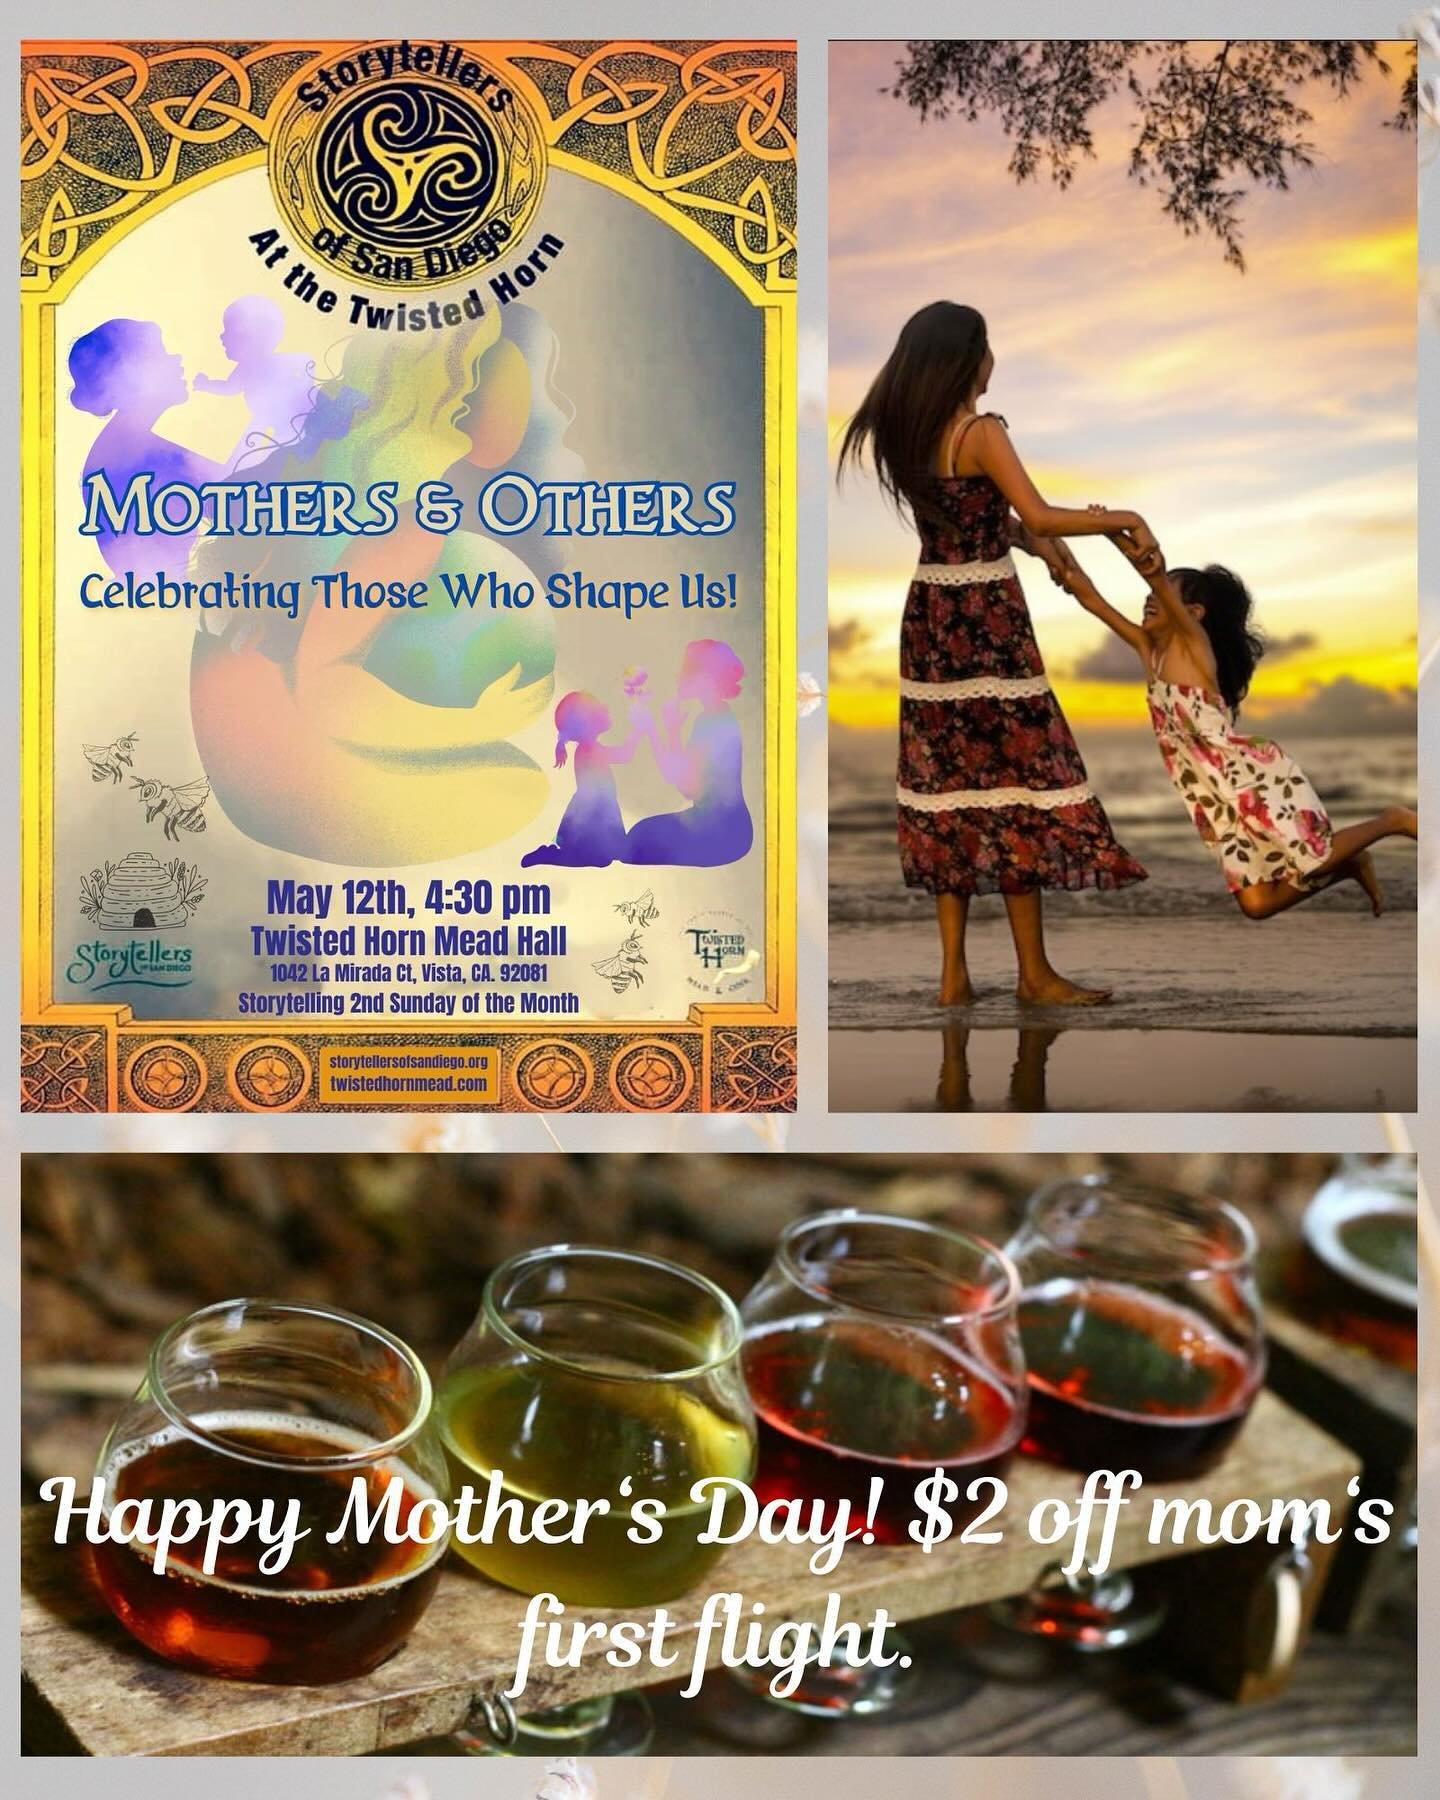 This Sunday is Mother's Day and to show our appreciation to those ever so important ladies, we are offering $2 off of &quot;Mom's First Flight&quot; of our award winning meads &amp; ciders this weekend. So, after you have taken mom out for her tasty 